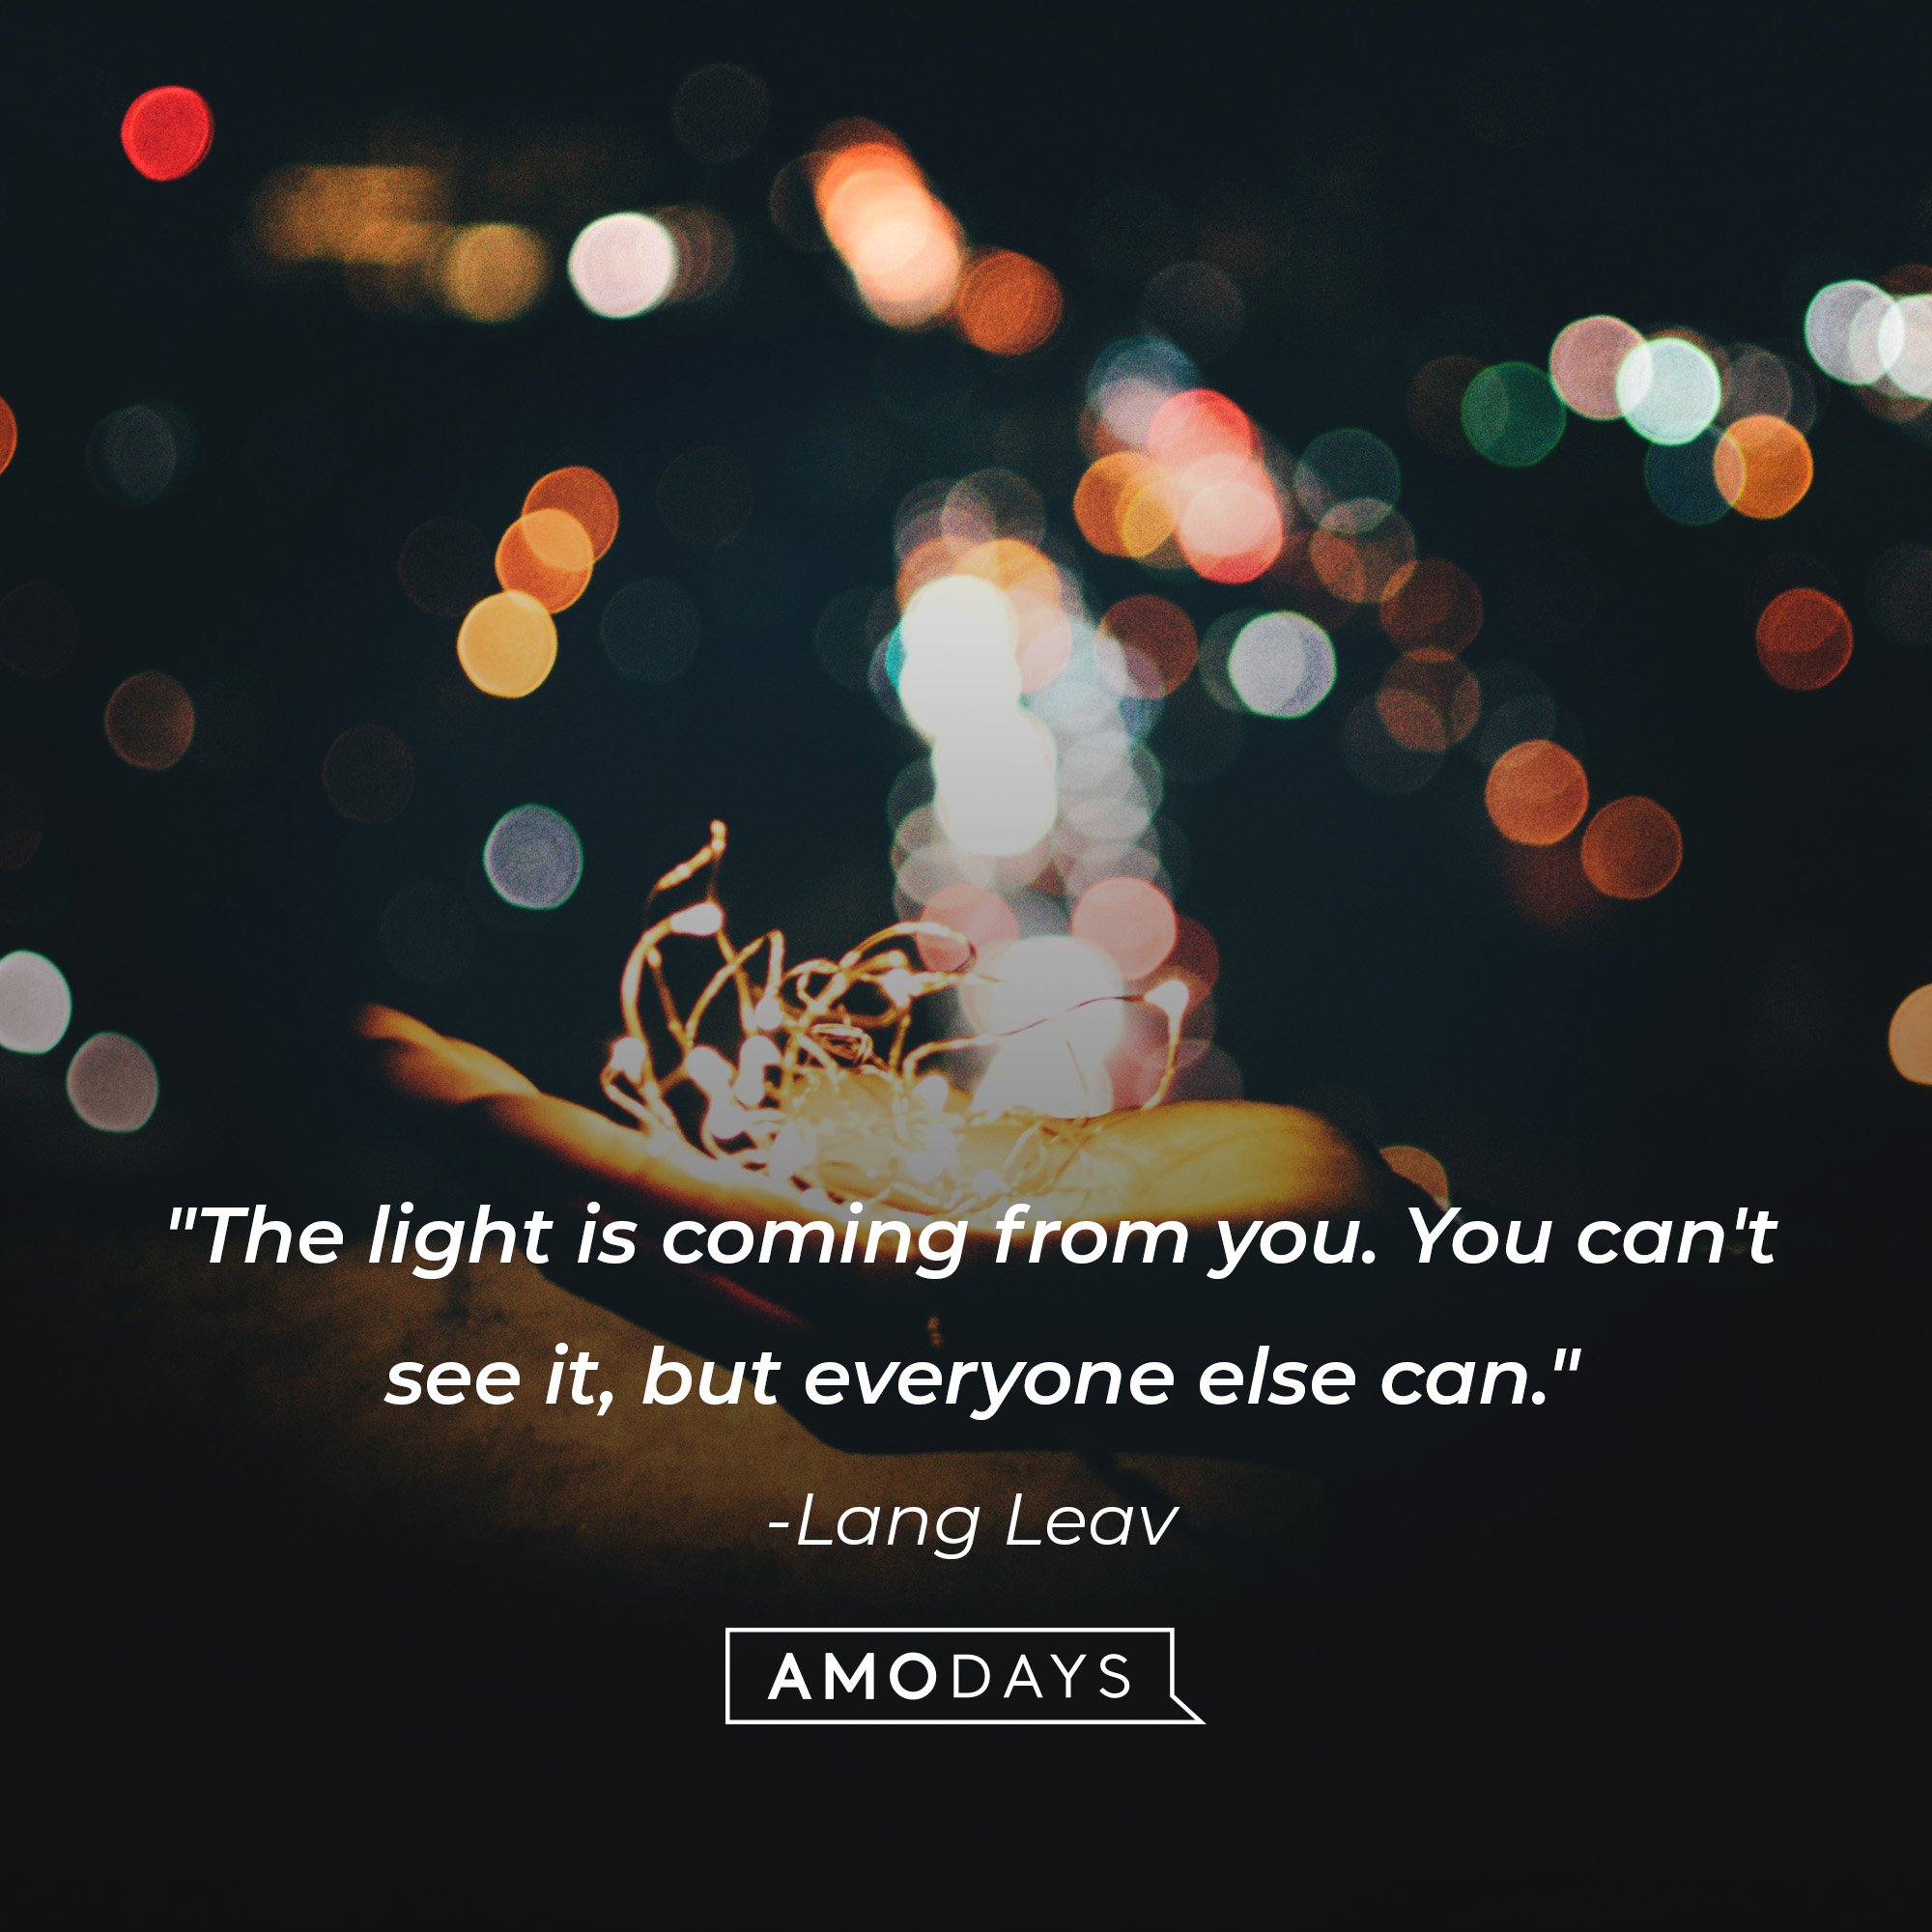  Lang Leav’s quote: "The light is coming from you. You can't see it, but everyone else can." | Image: AmoDays